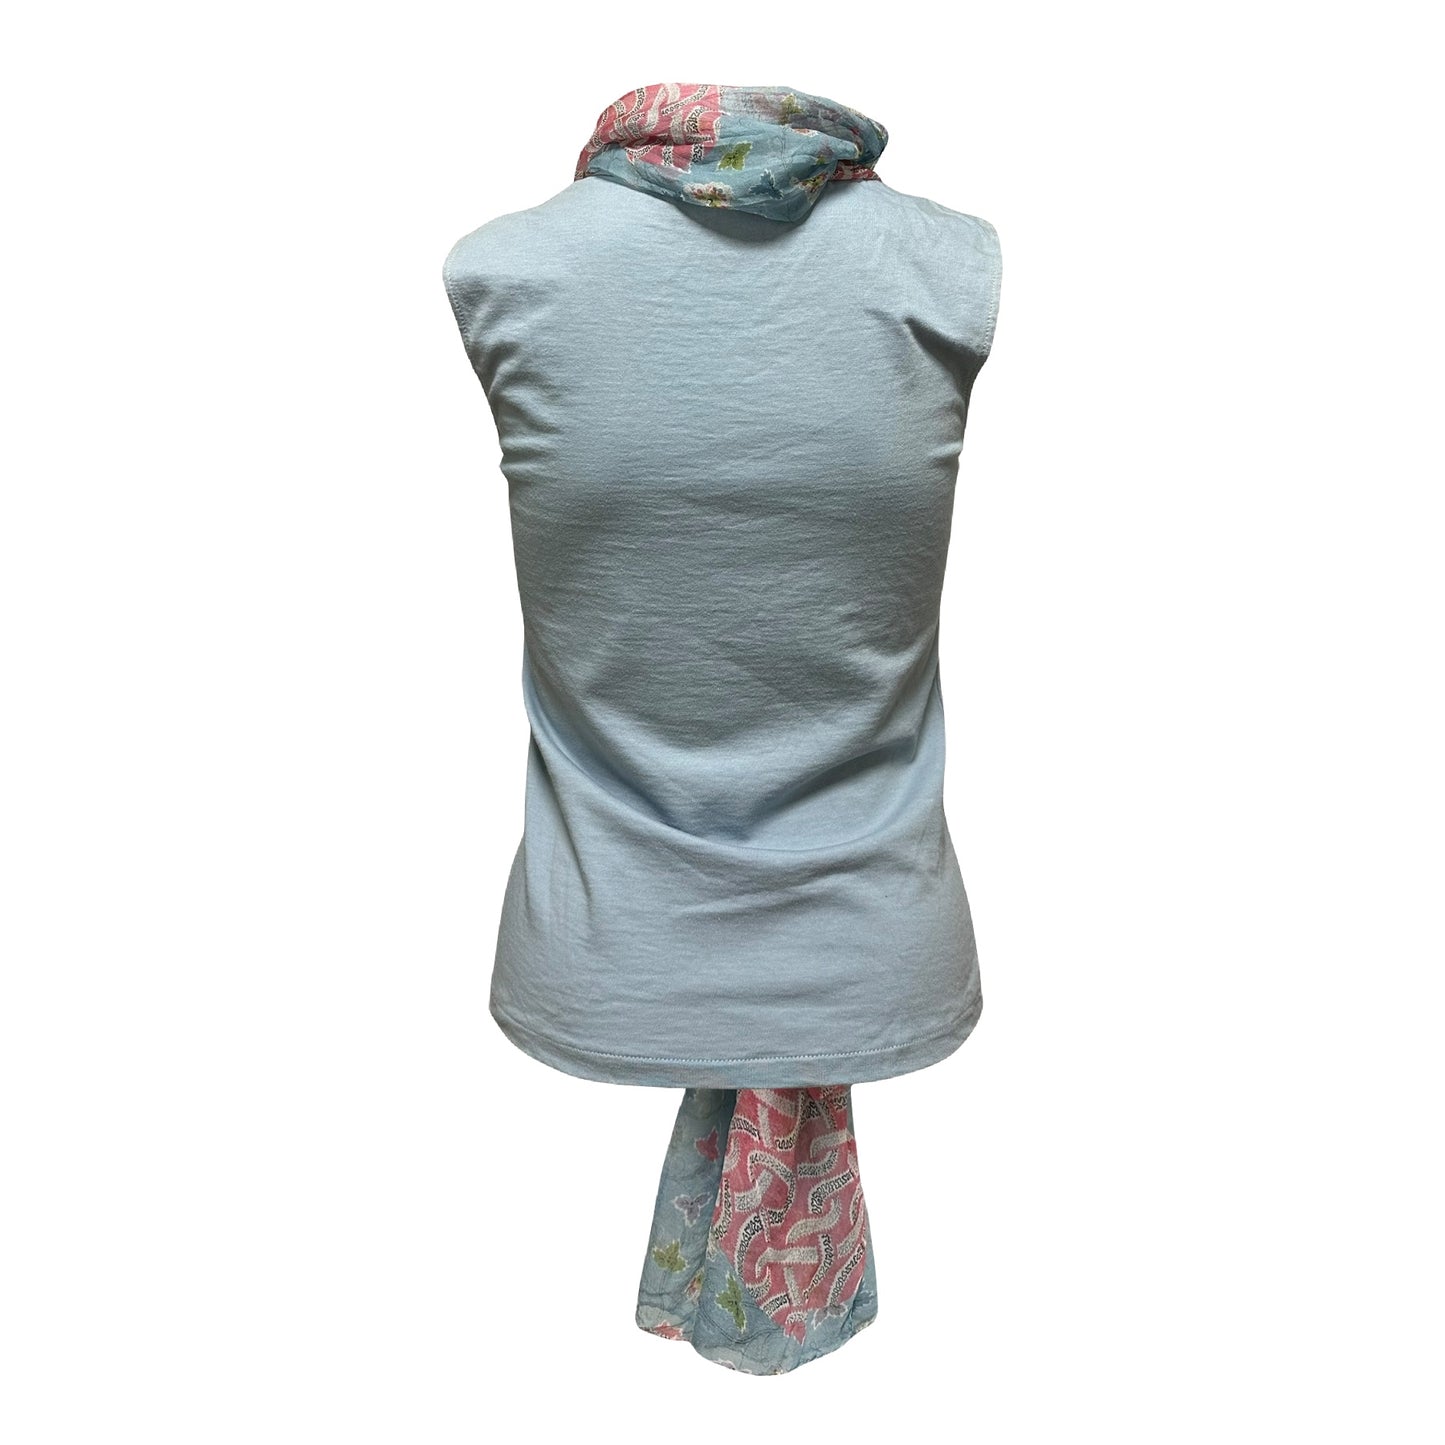 CHRISTIAN DIOR Spring Summer 2003 Tank Top with Floral Print Scarf